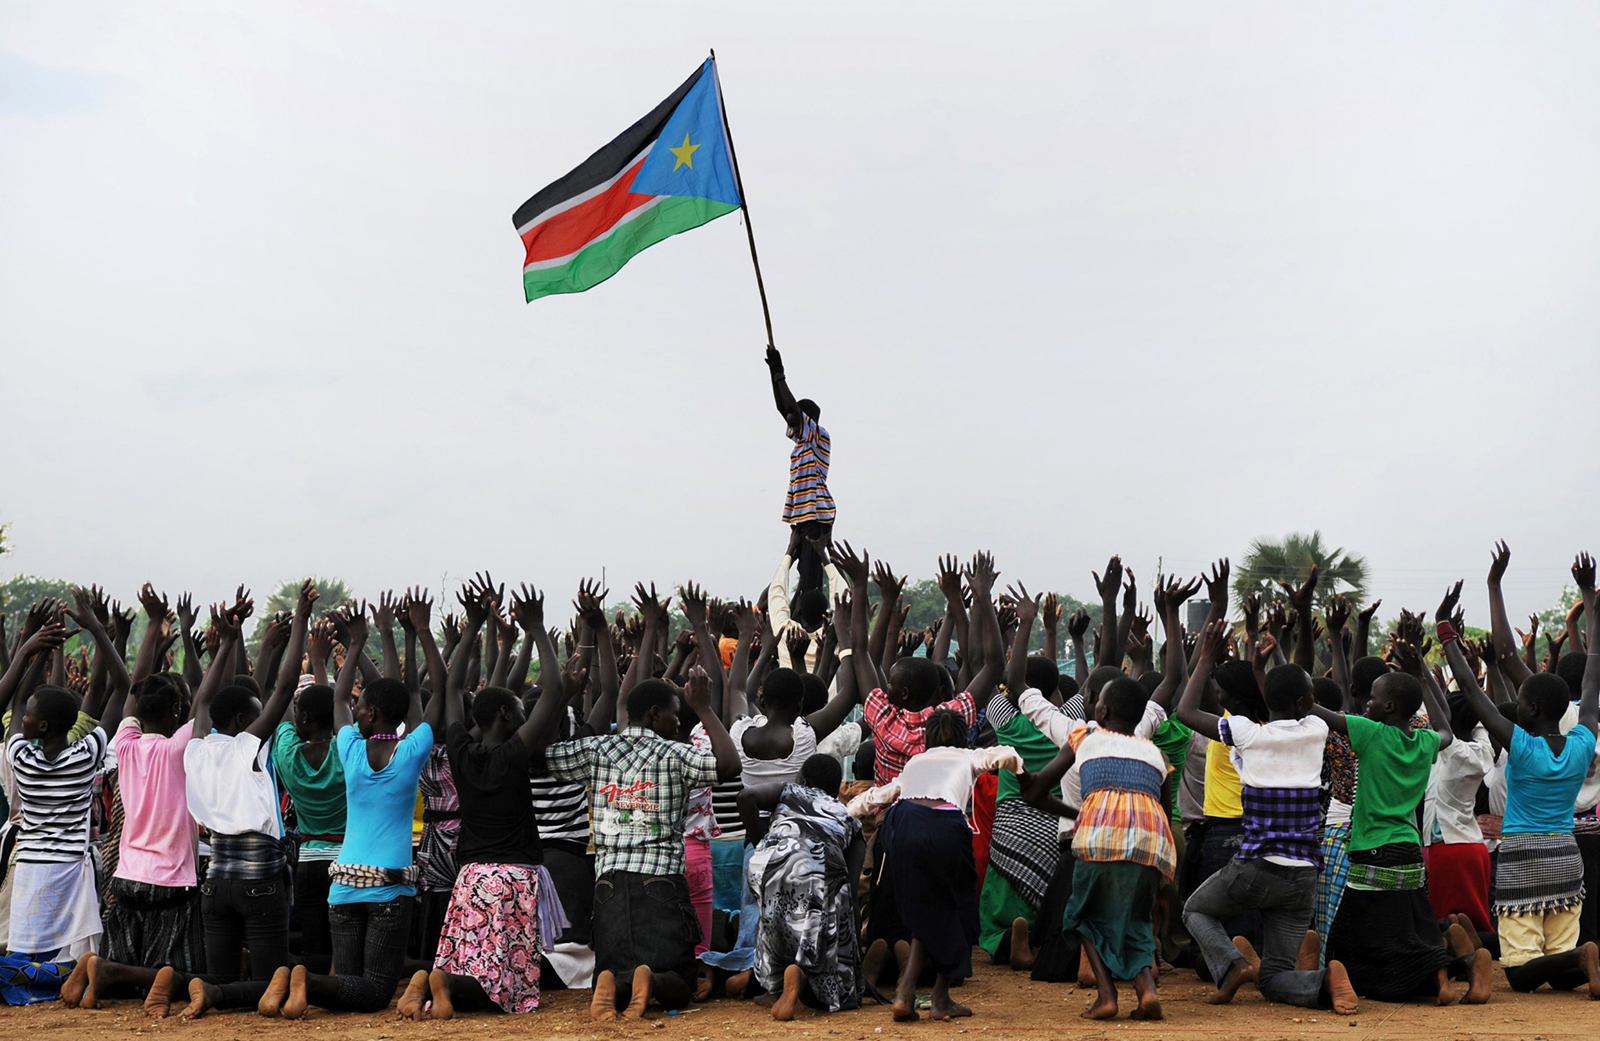 YOUNGEST COUNTRY IN THE WORLD- The people of South Sudan were formally recognized as an independent country in 2011, making it the youngest country in the world to-date.